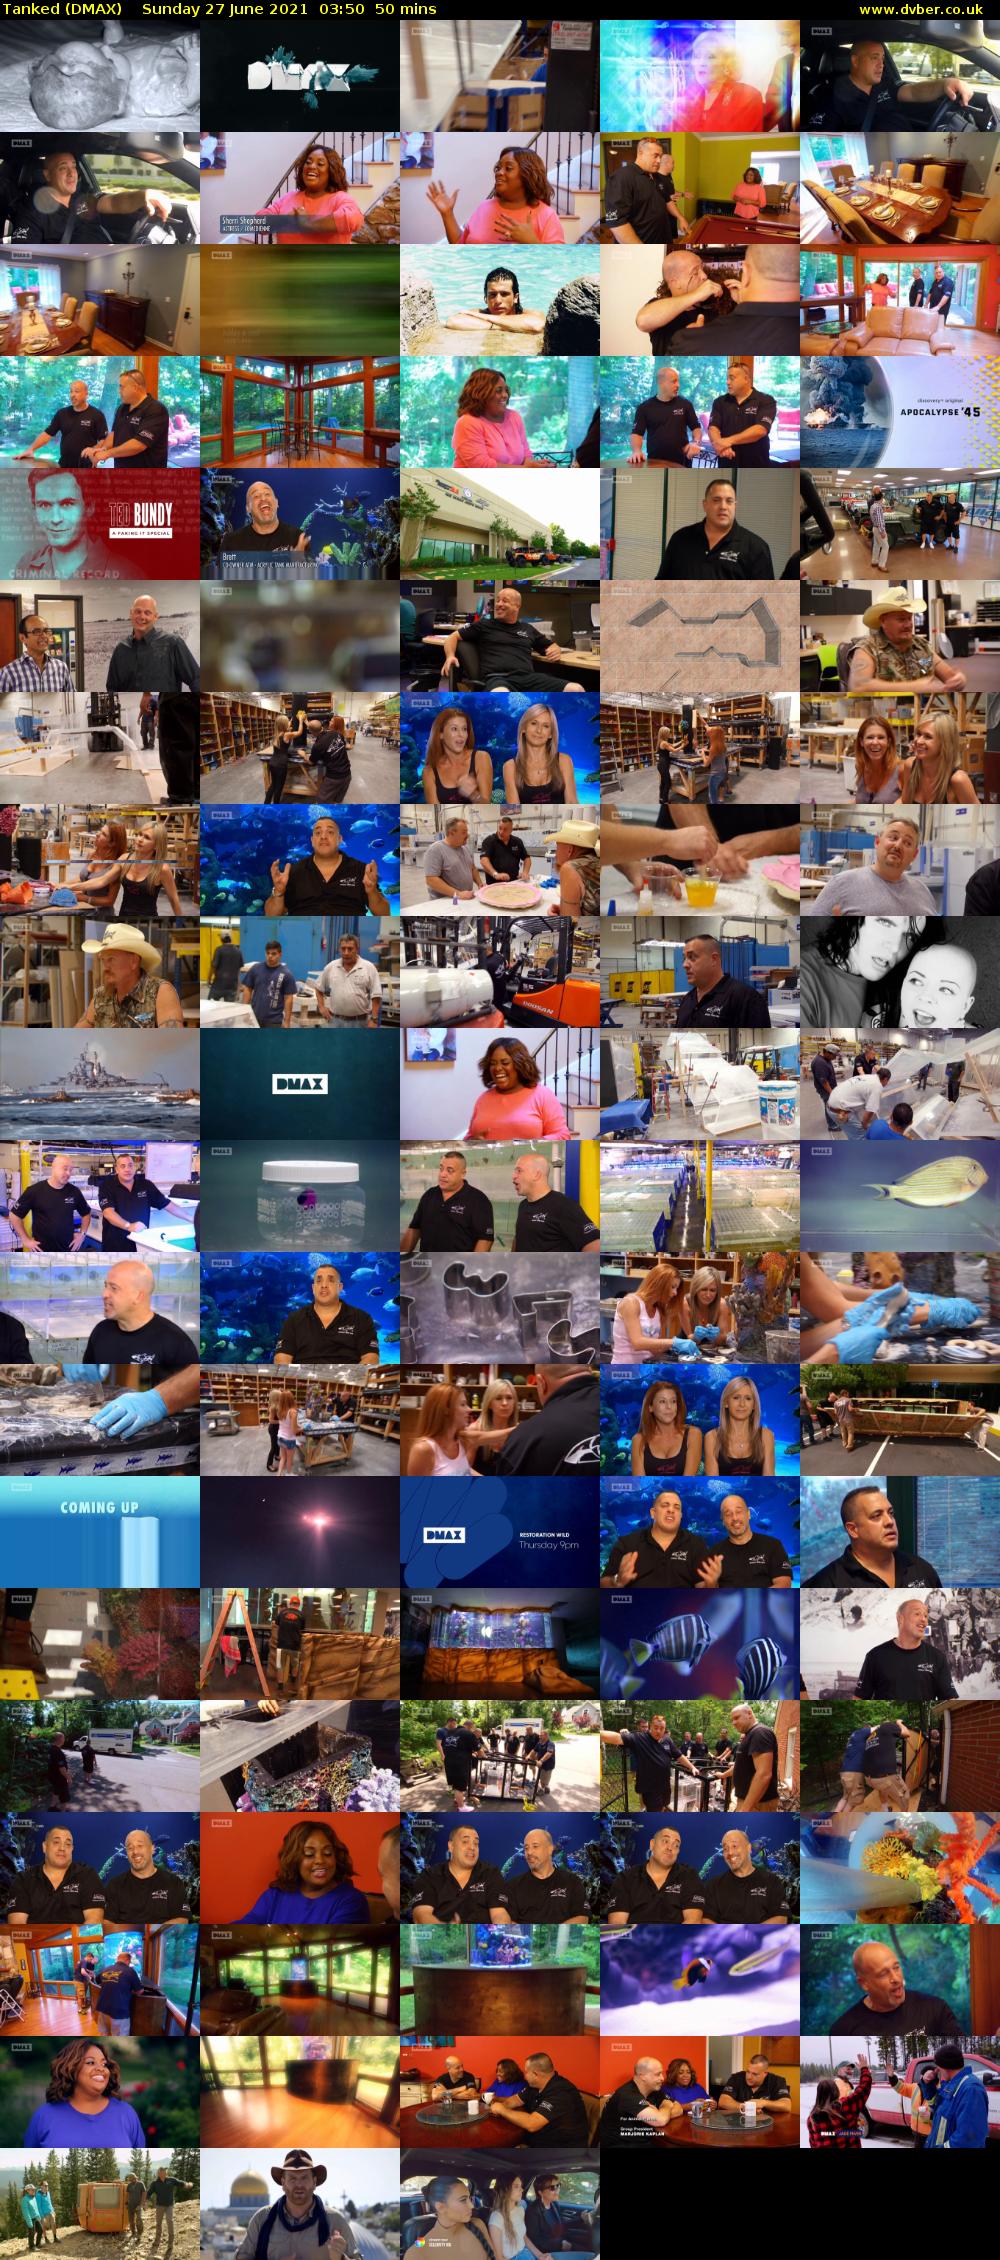 Tanked (DMAX) Sunday 27 June 2021 03:50 - 04:40